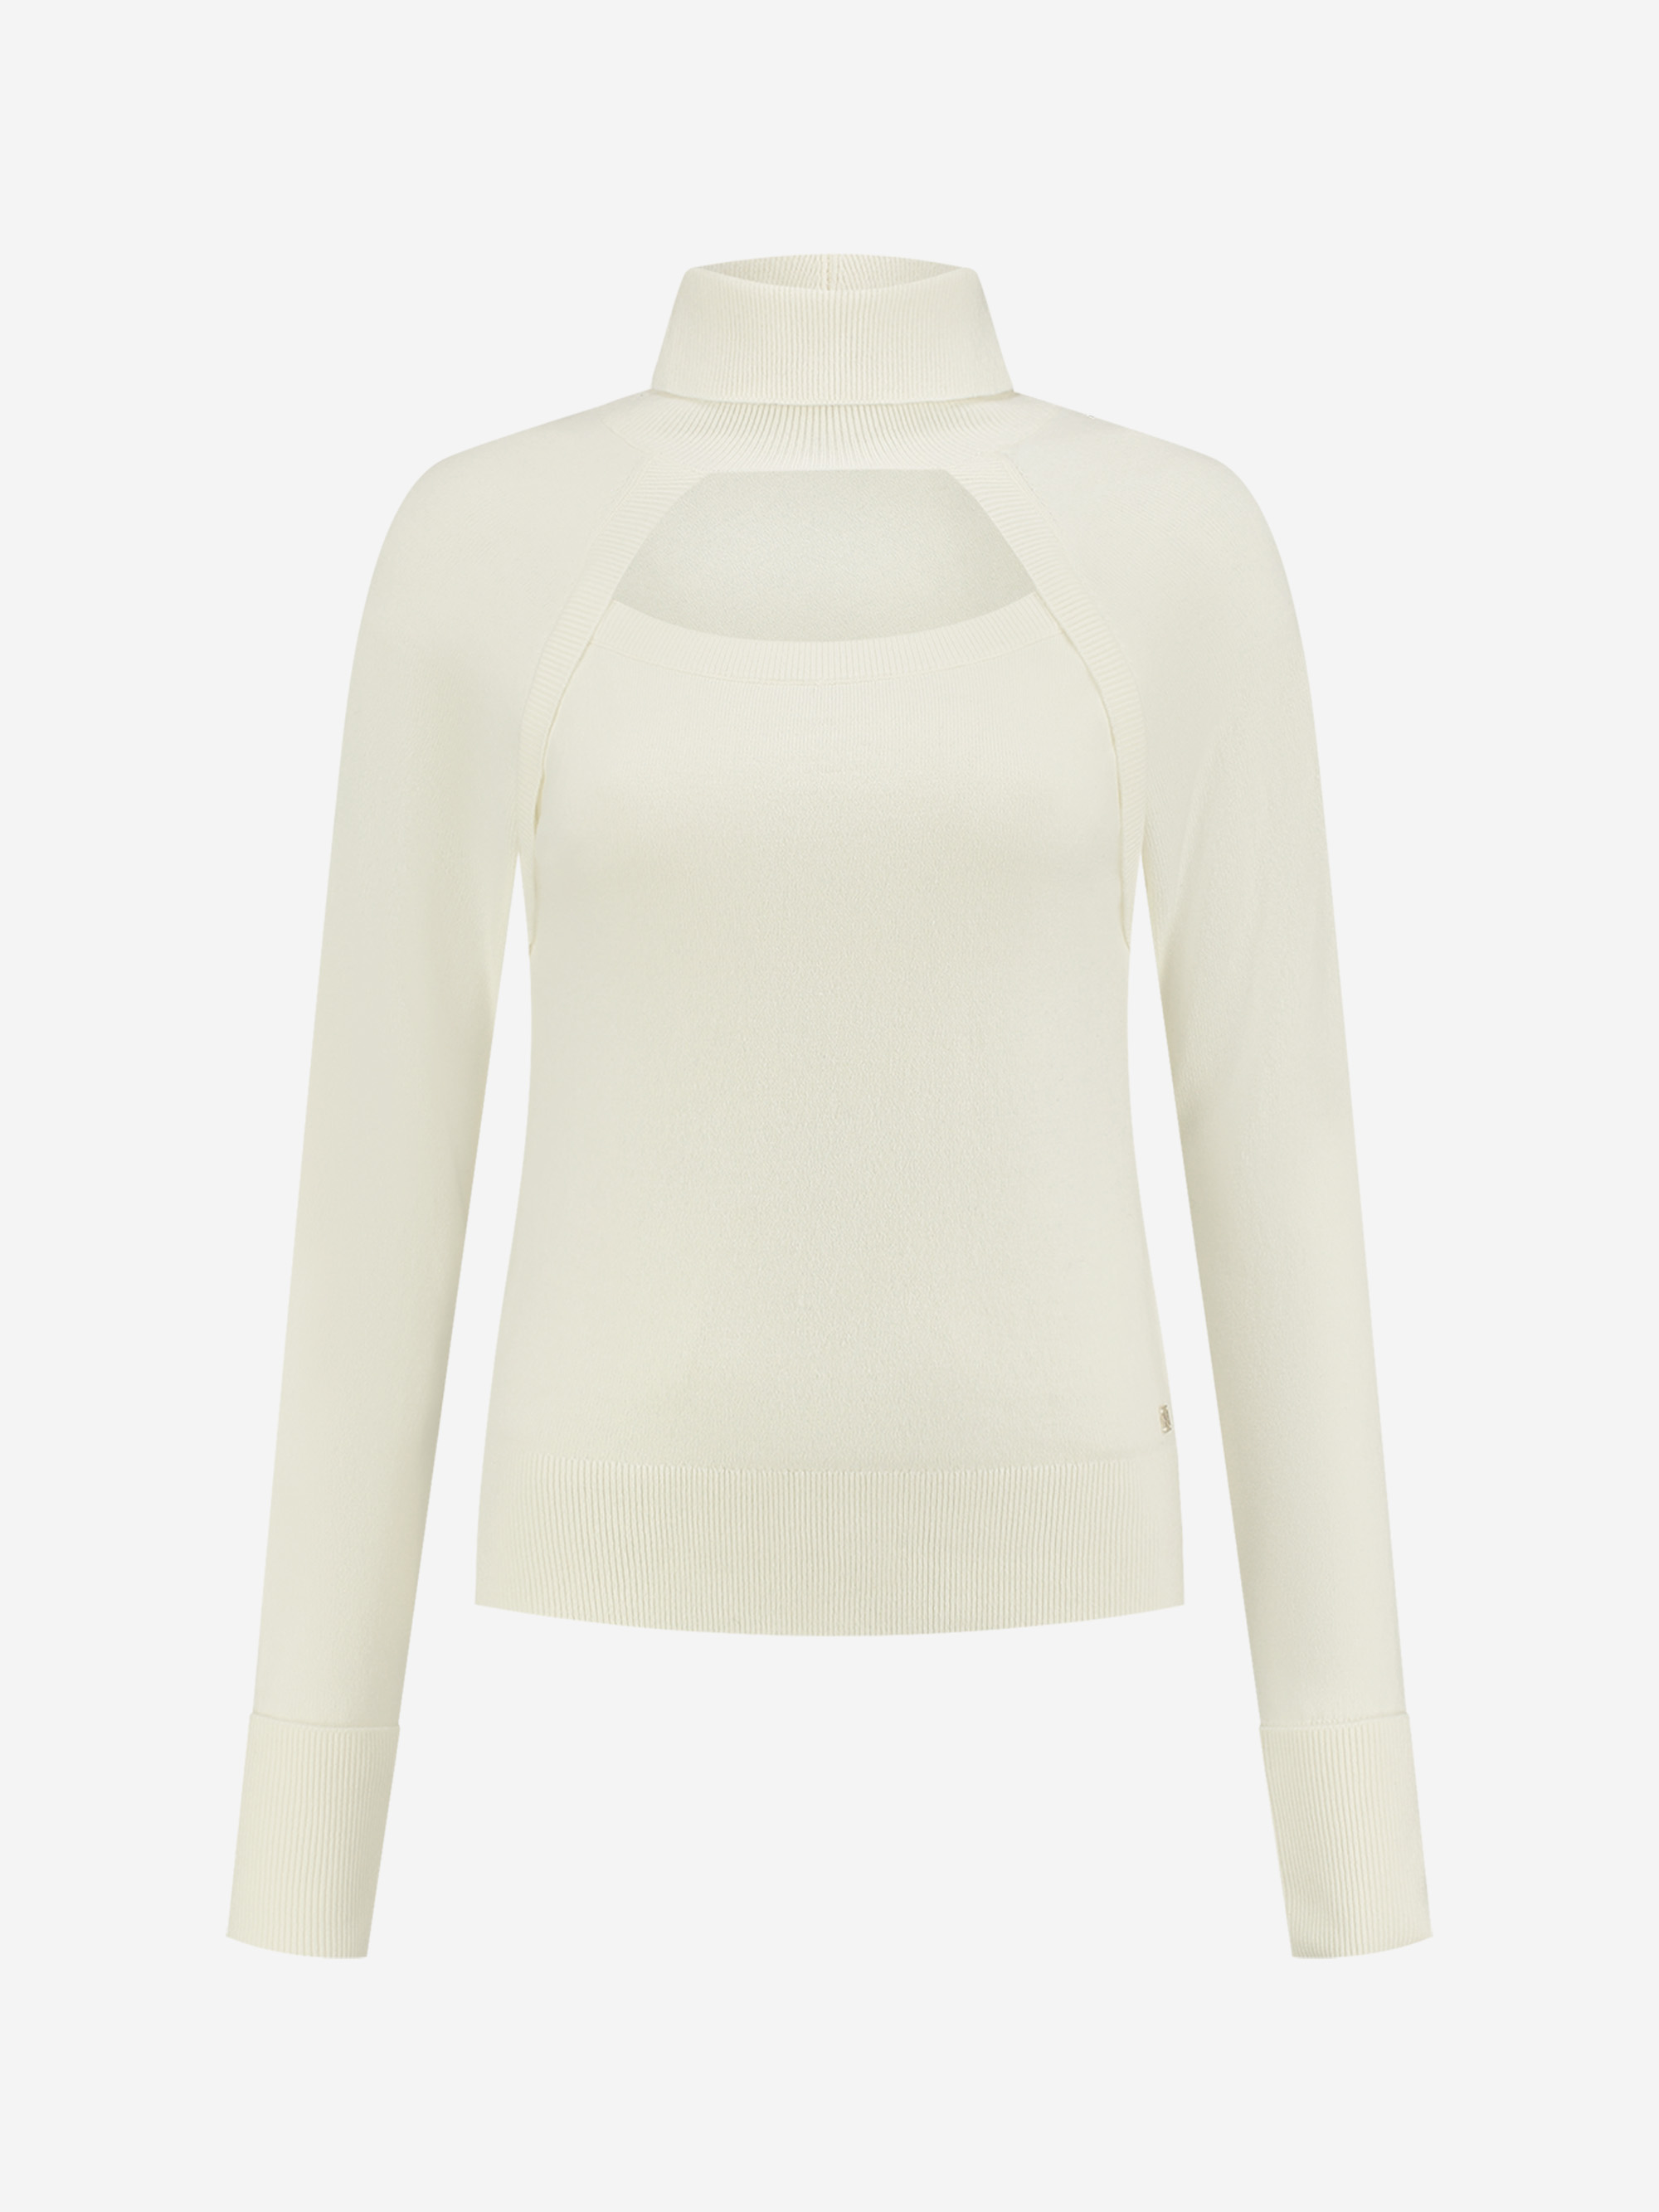  Sweater with open neckline and turtle neck  